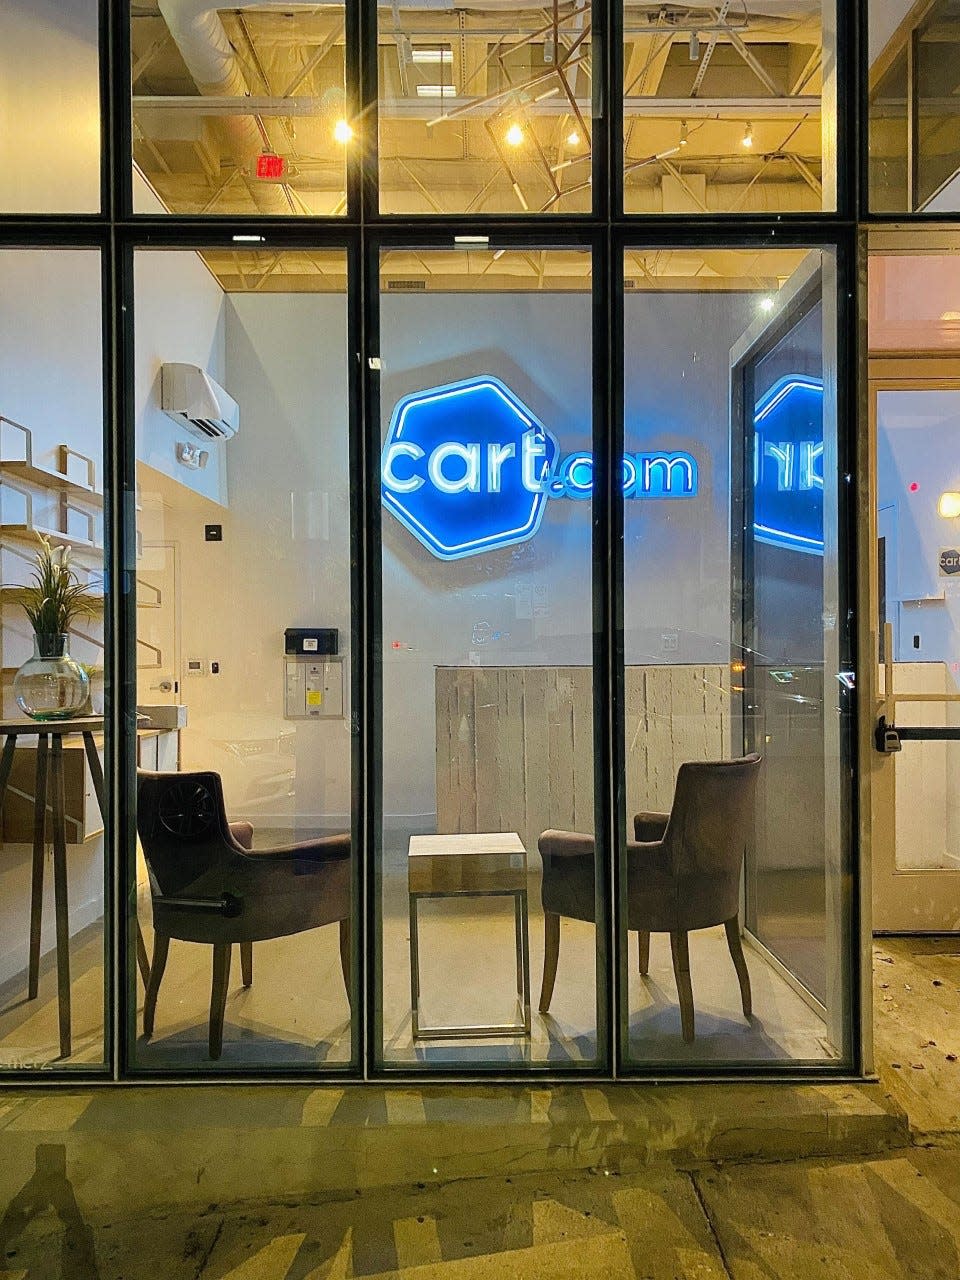 Cart.com is moving its headquarters from Houston to Austin, where the company already has 150 employees and plans to hire 150 more. (Courtesy of Cart.com)